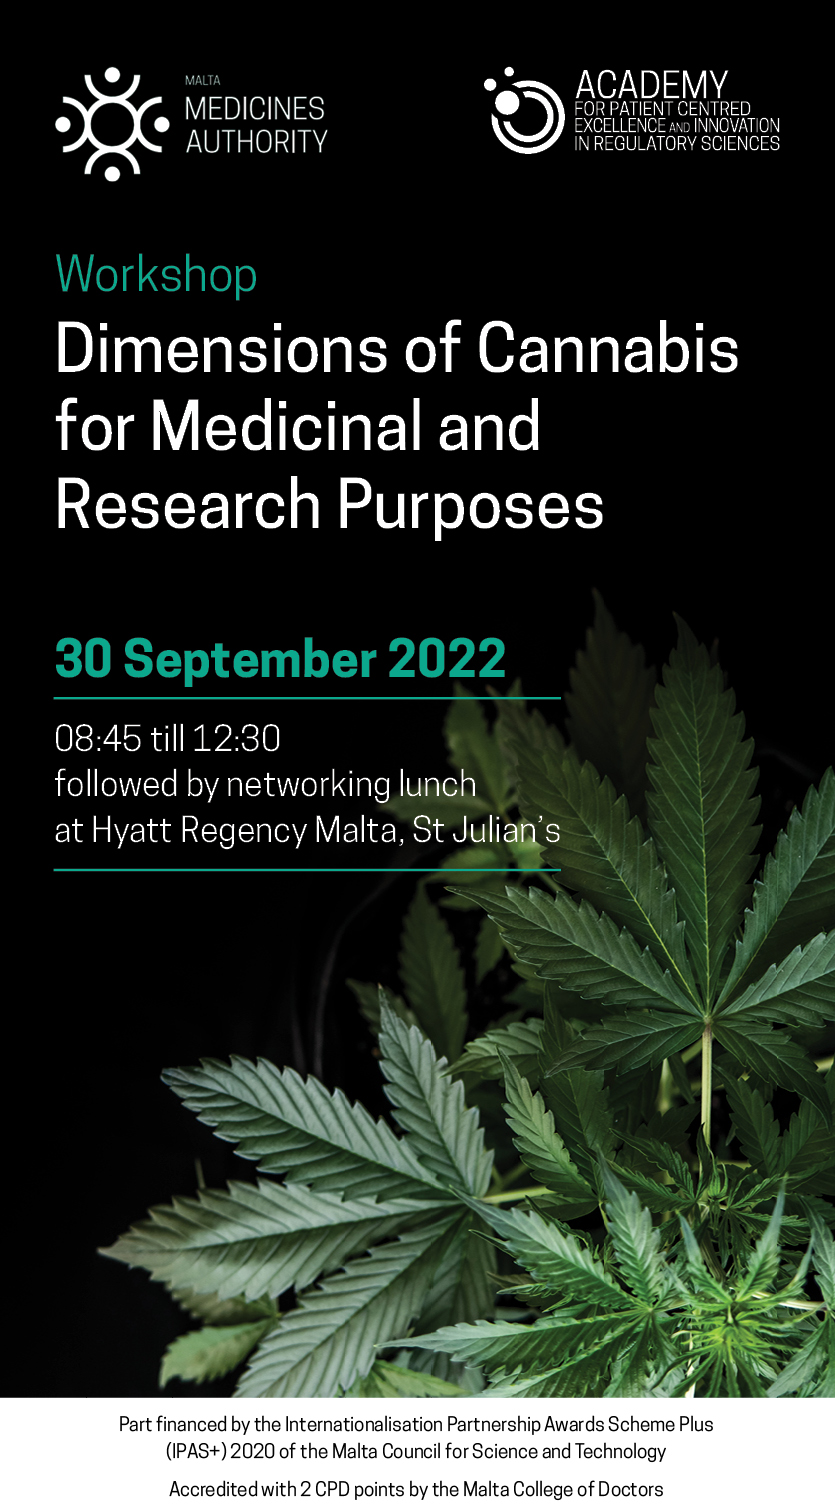 Workshop on Dimensions of Cannabis for Medicinal and Research Purposes